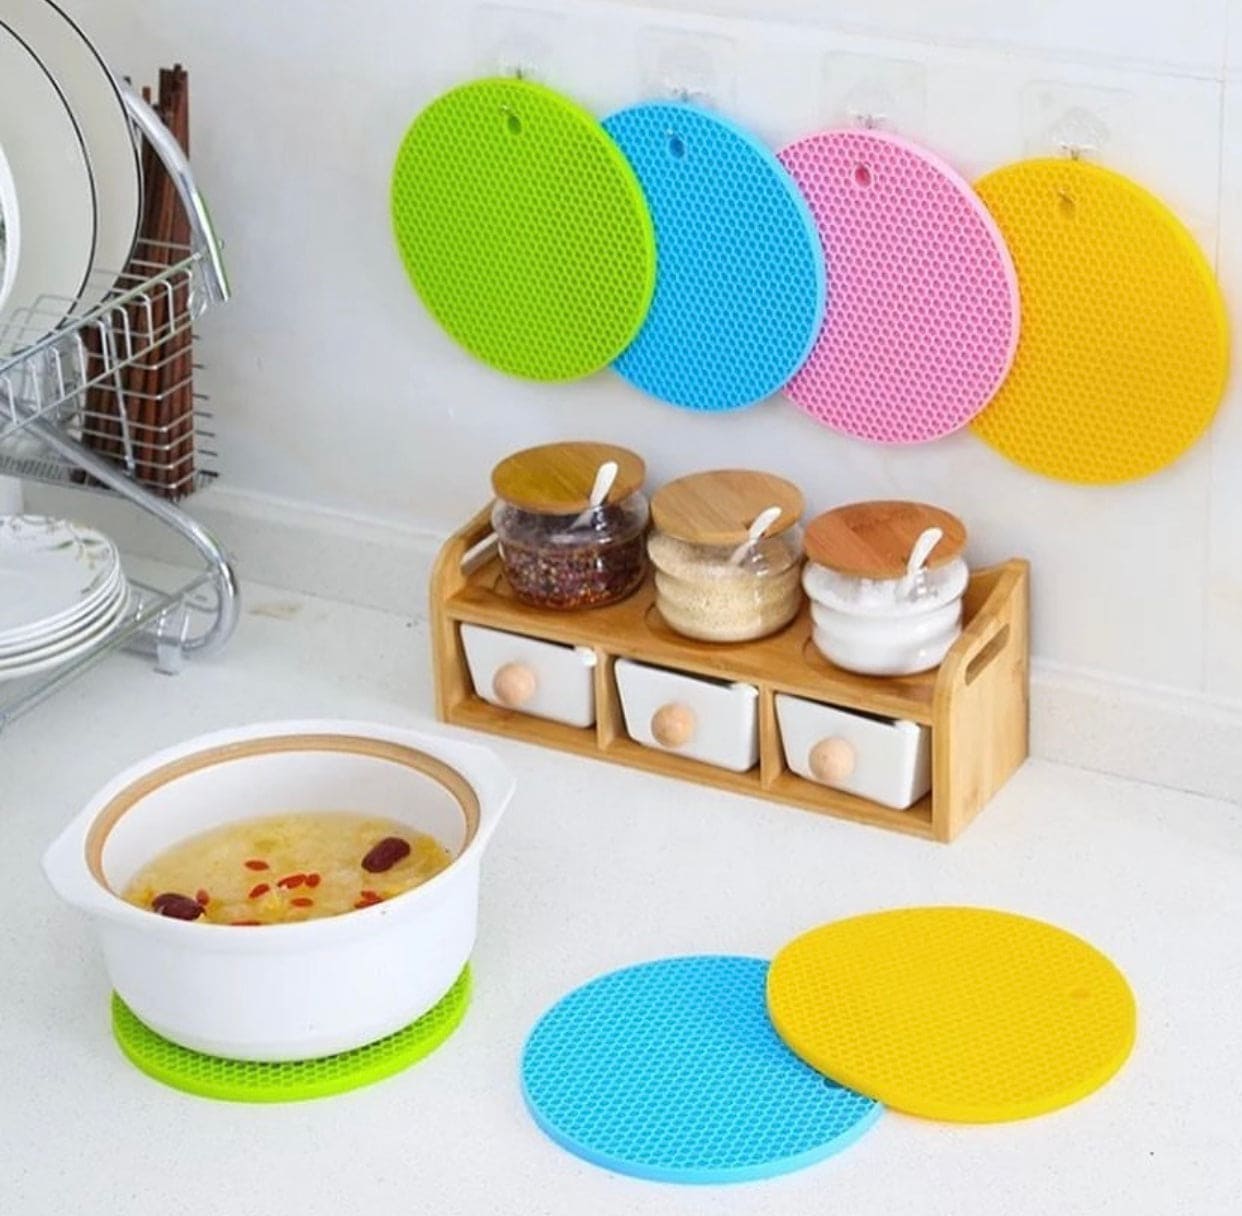 Round Honey Comb Silicon Placement Anti Scalding Non-Slip Pad, Insulation Pot Pad, Table Mat Bowl Cup Pads, Mat Drink Coaster